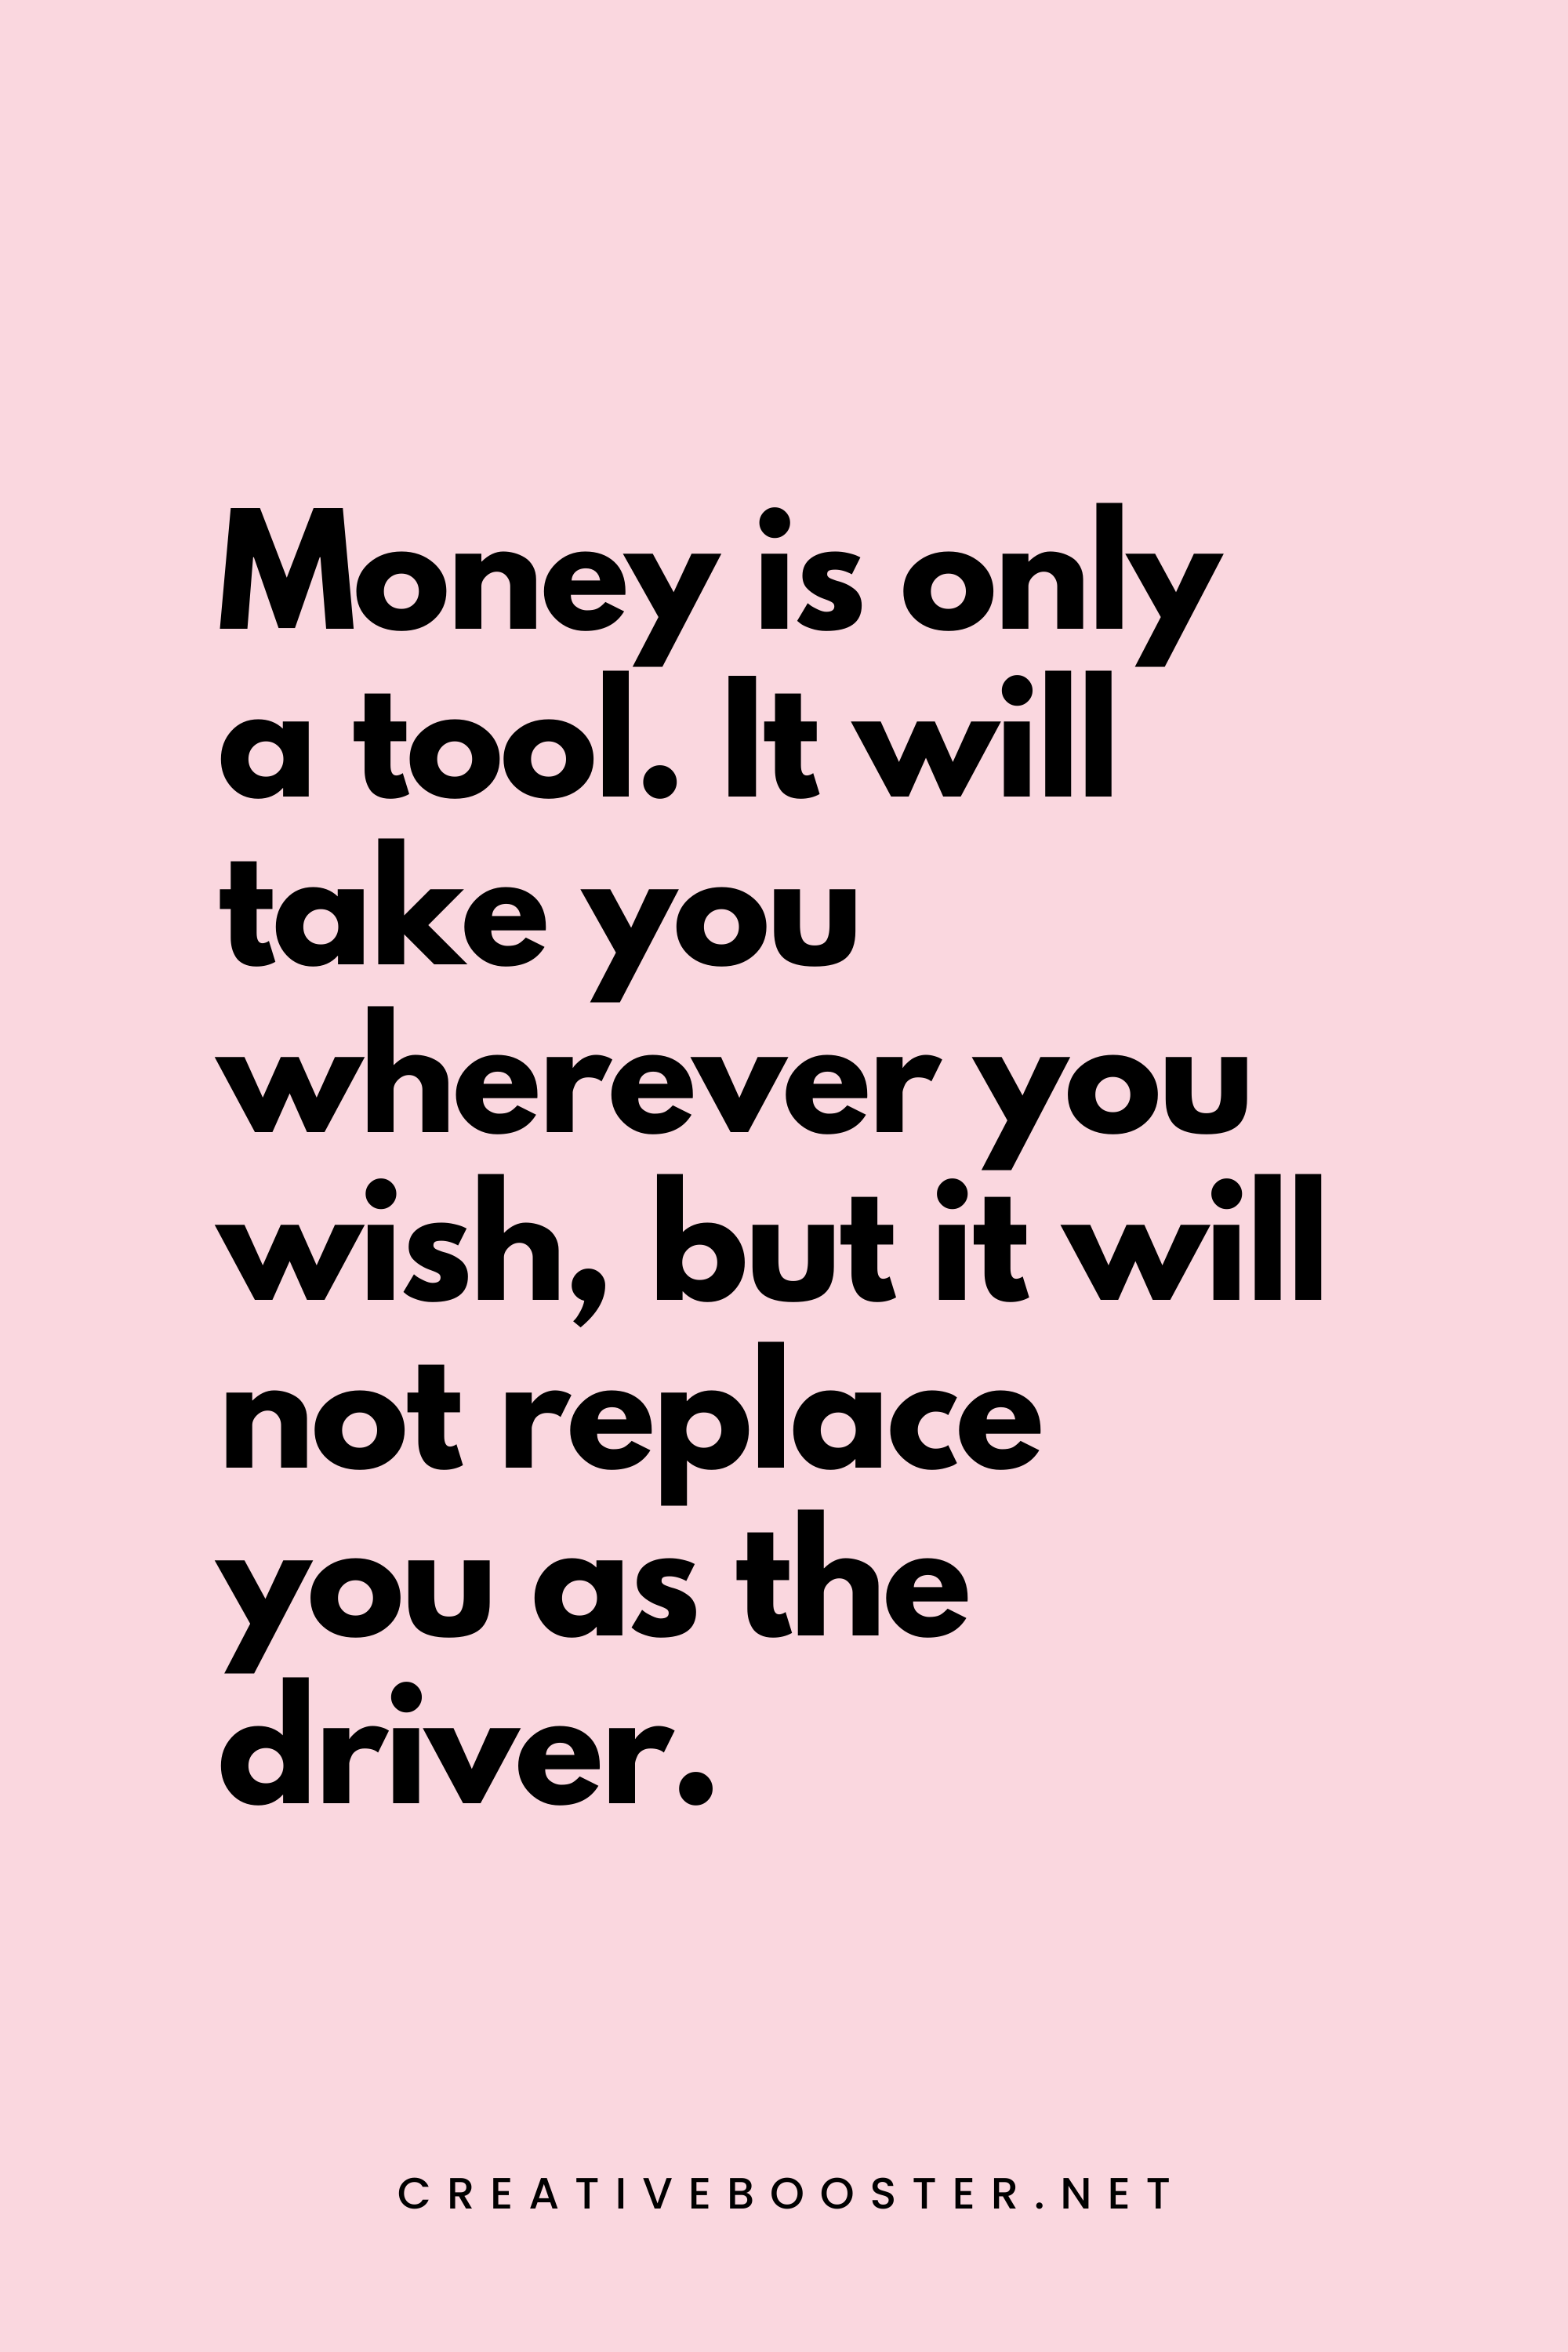 3. Money is only a tool. It will take you wherever you wish, but it will not replace you as the driver. - Ayn Rand - 1. Popular Financial Freedom Quotes